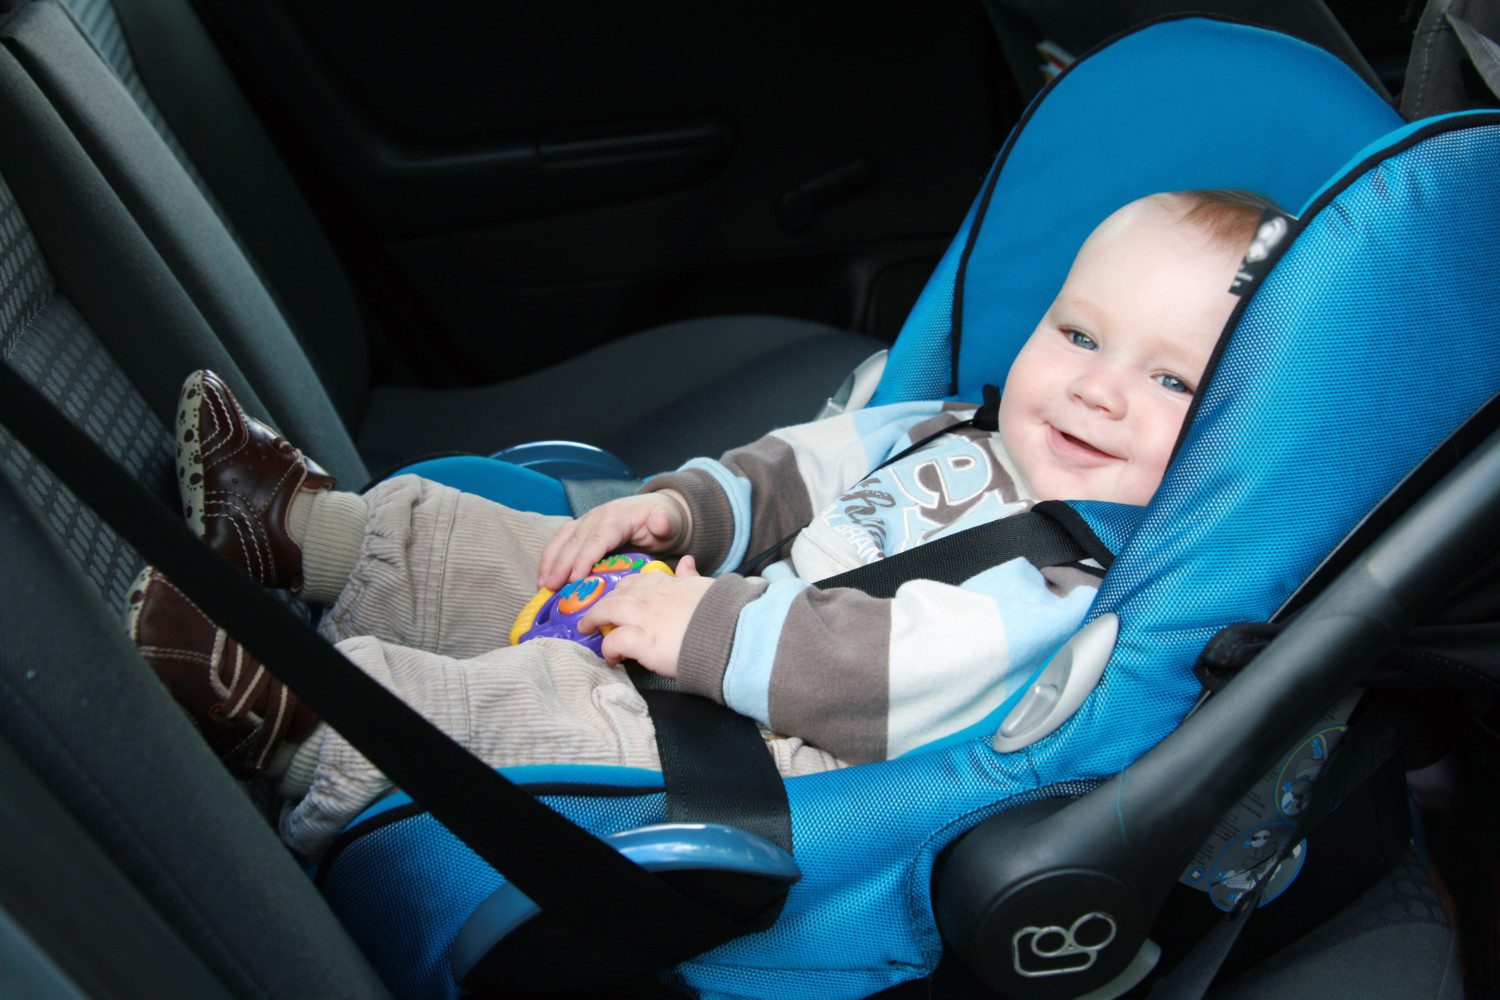 Free Car Seats Are Available To Some, Where Can I Get A Free Car Seat For My Newborn In Taiwan